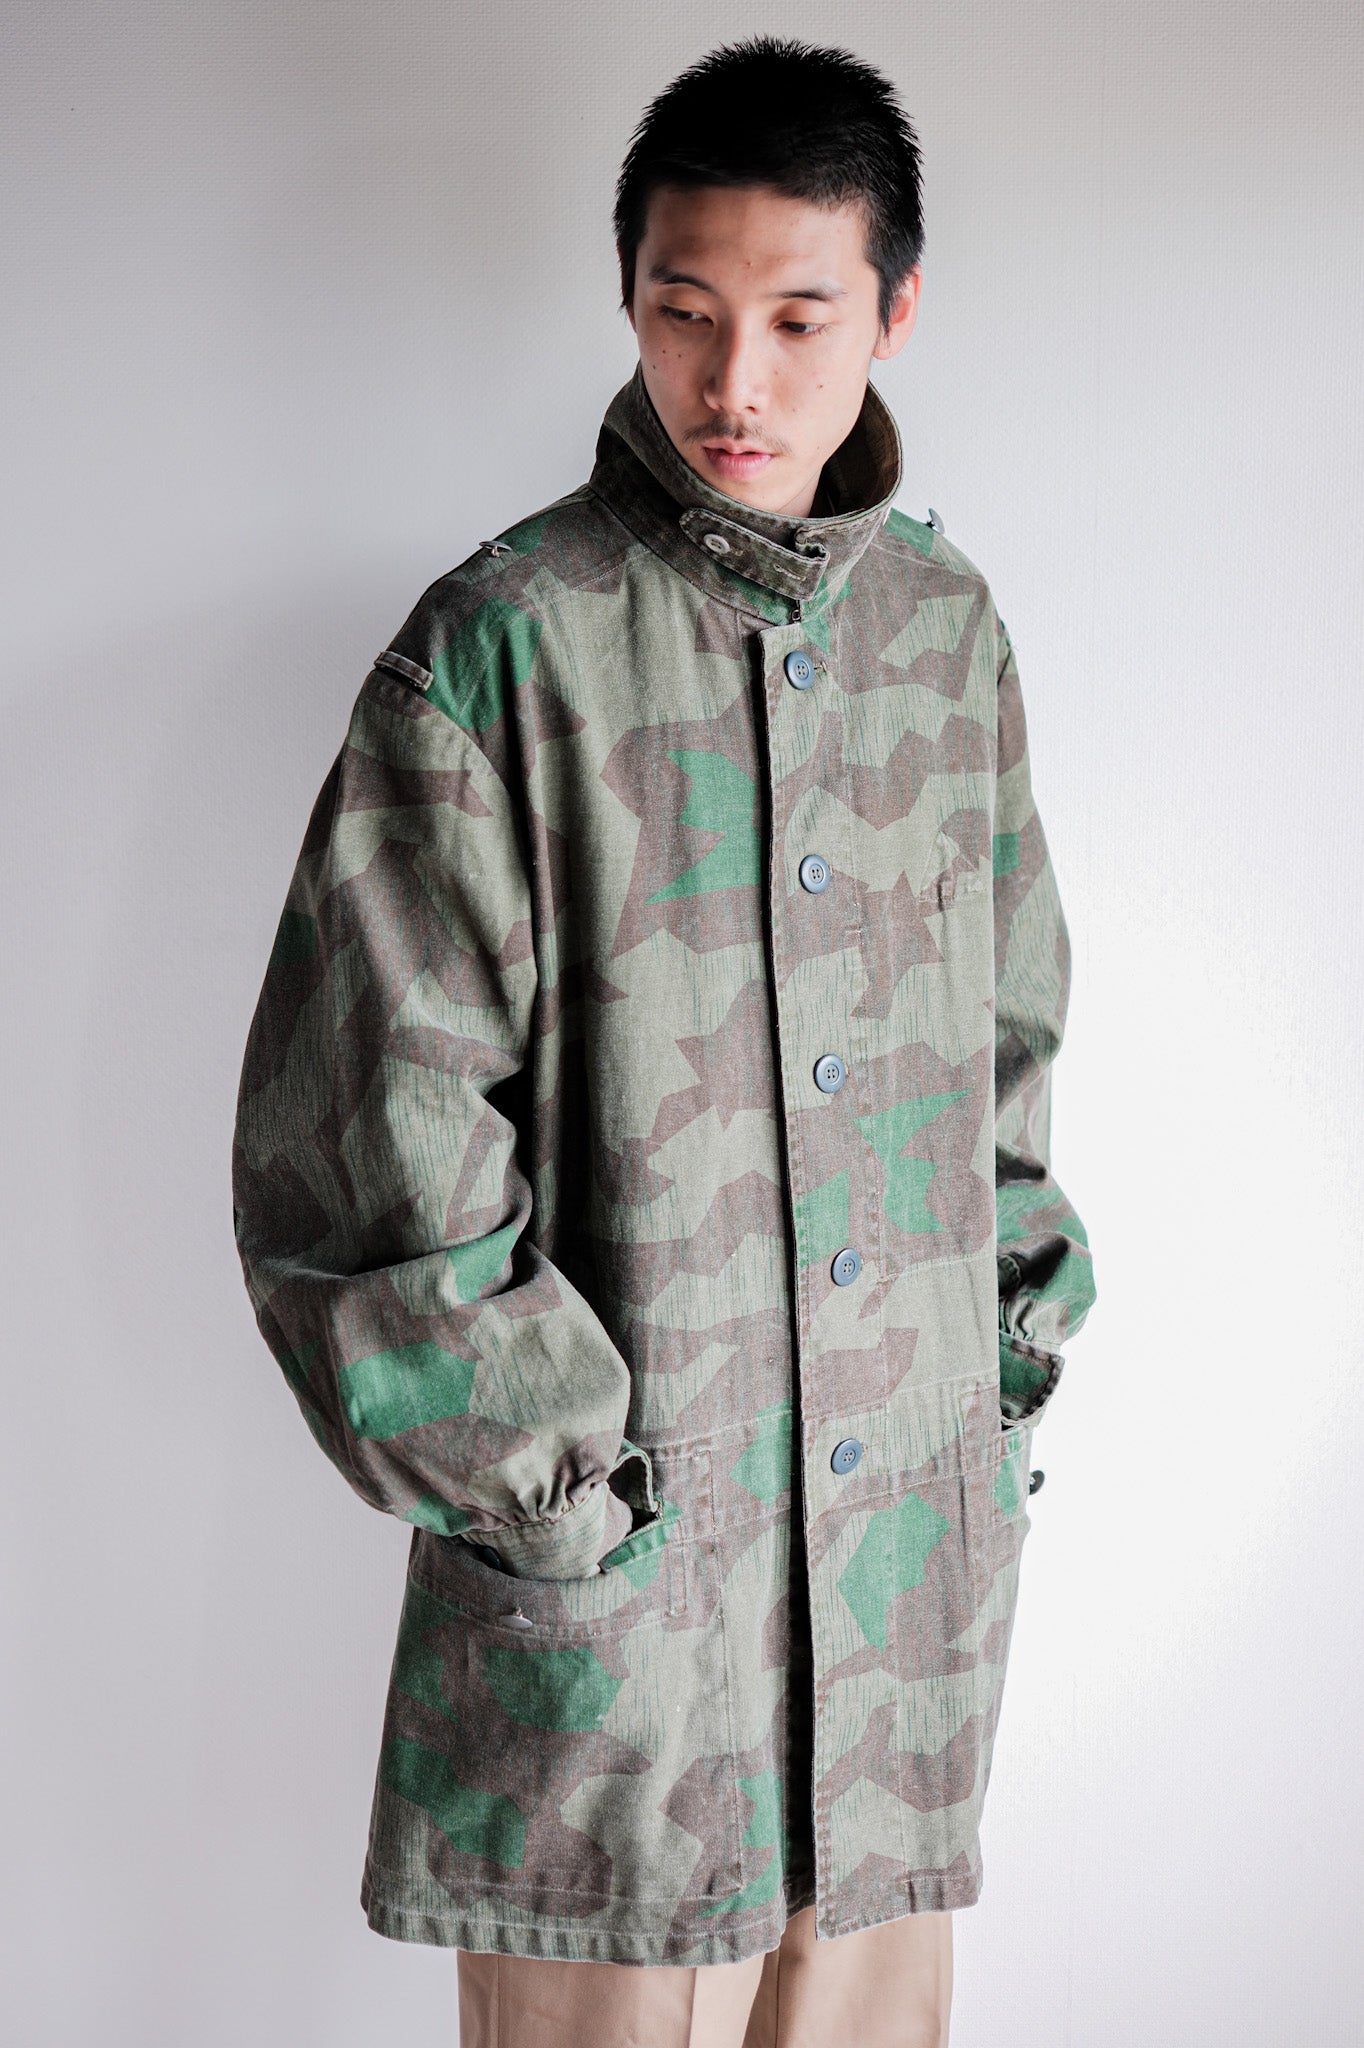 【~70's】German Army Type Splinter Camouflage Paratrooper Jacket "Reproduction"